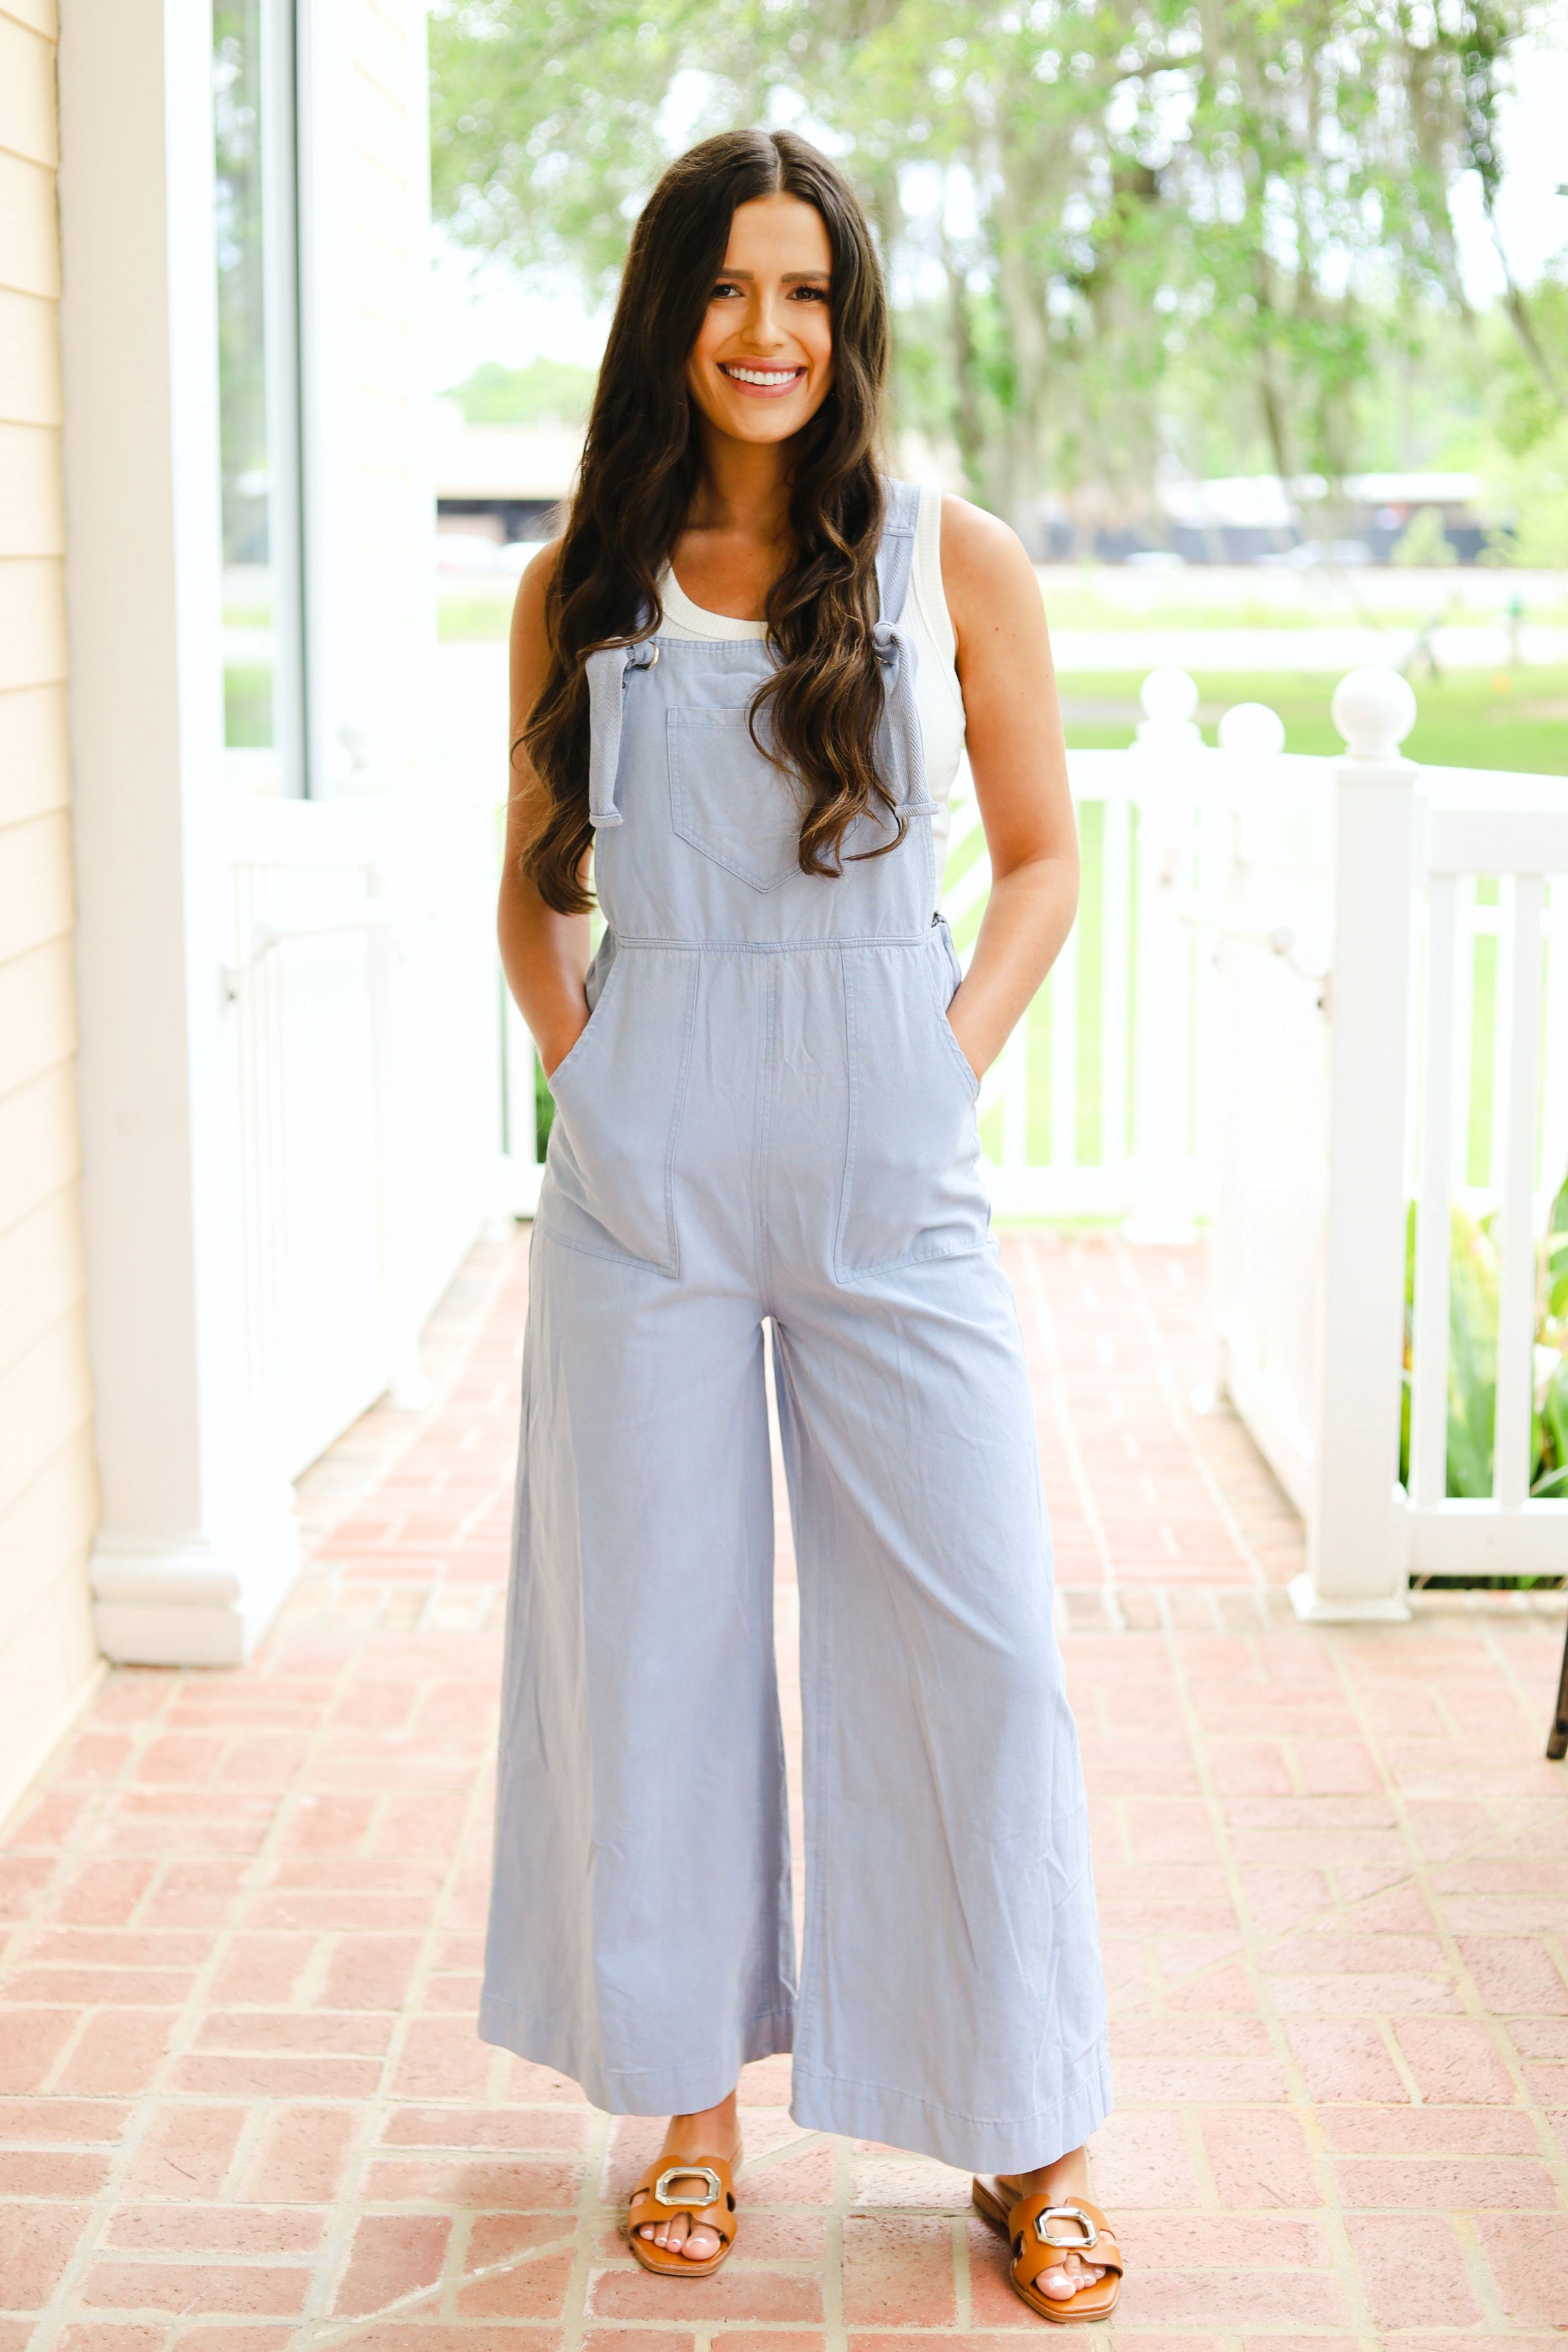 The Dusty Blue Overalls